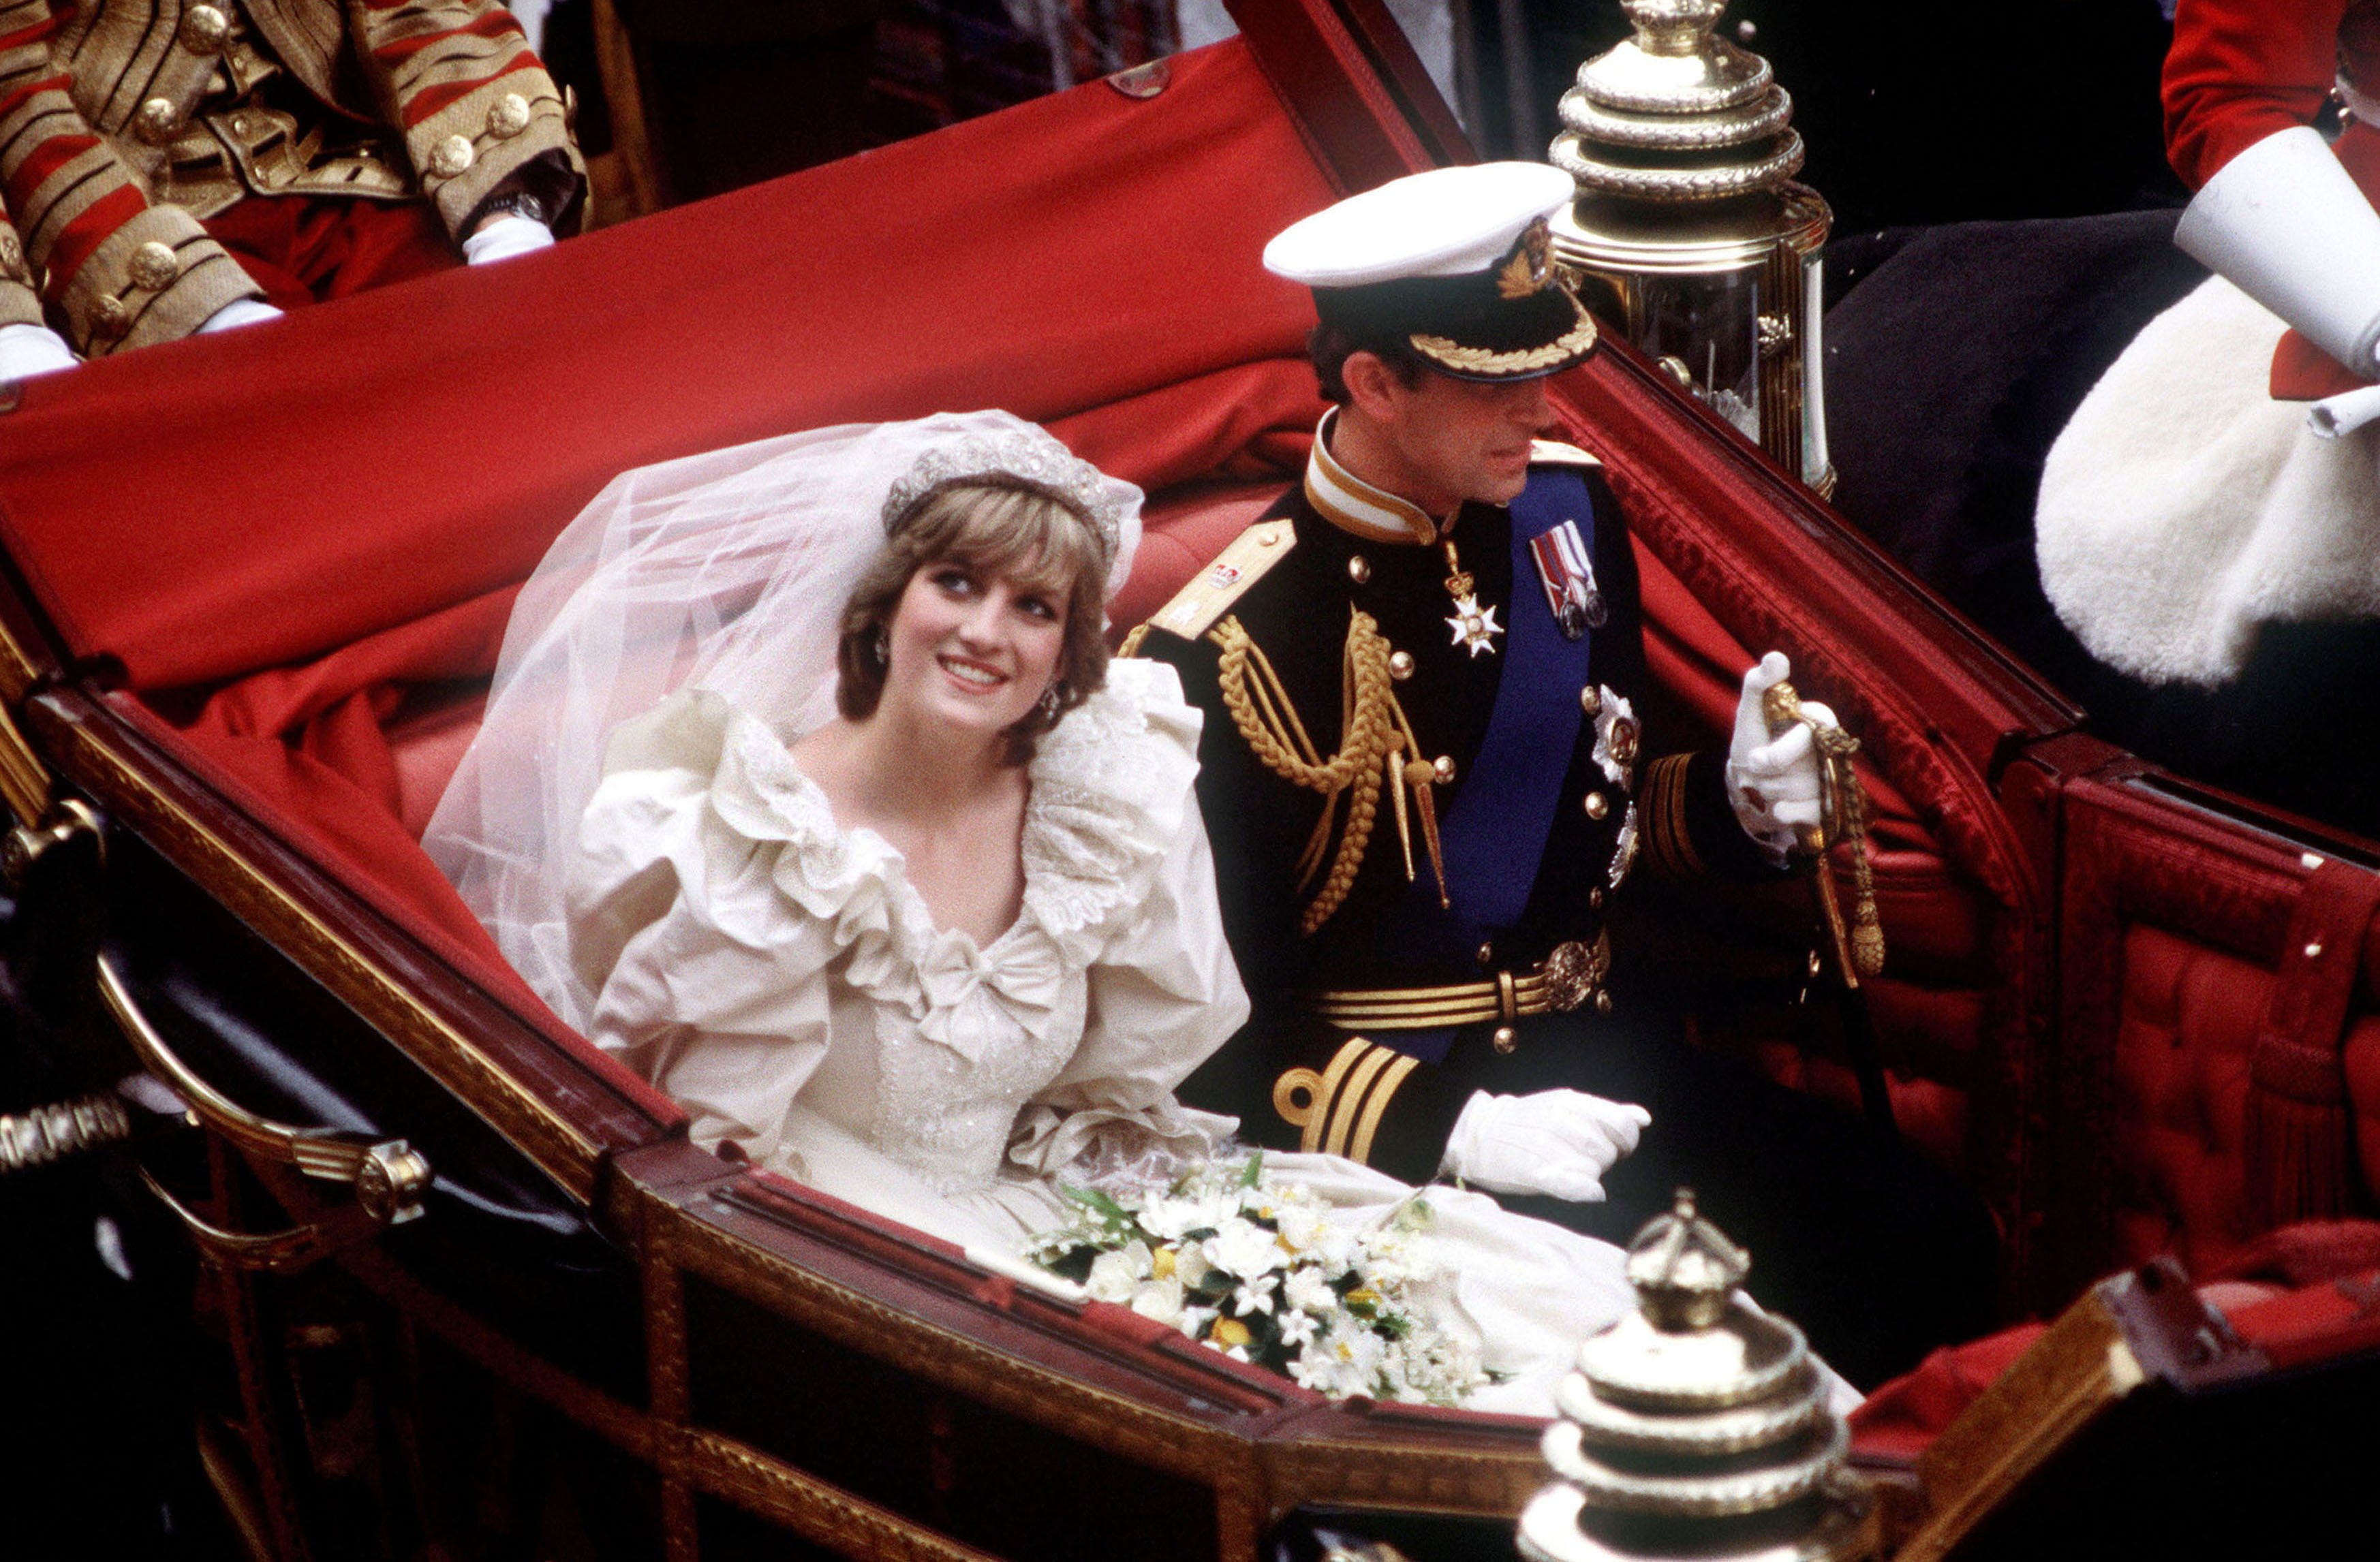 The Prince and Princess of Wales return to Buckingham Palace by carriage after their wedding, 29th July 1981. | Source: Getty Images